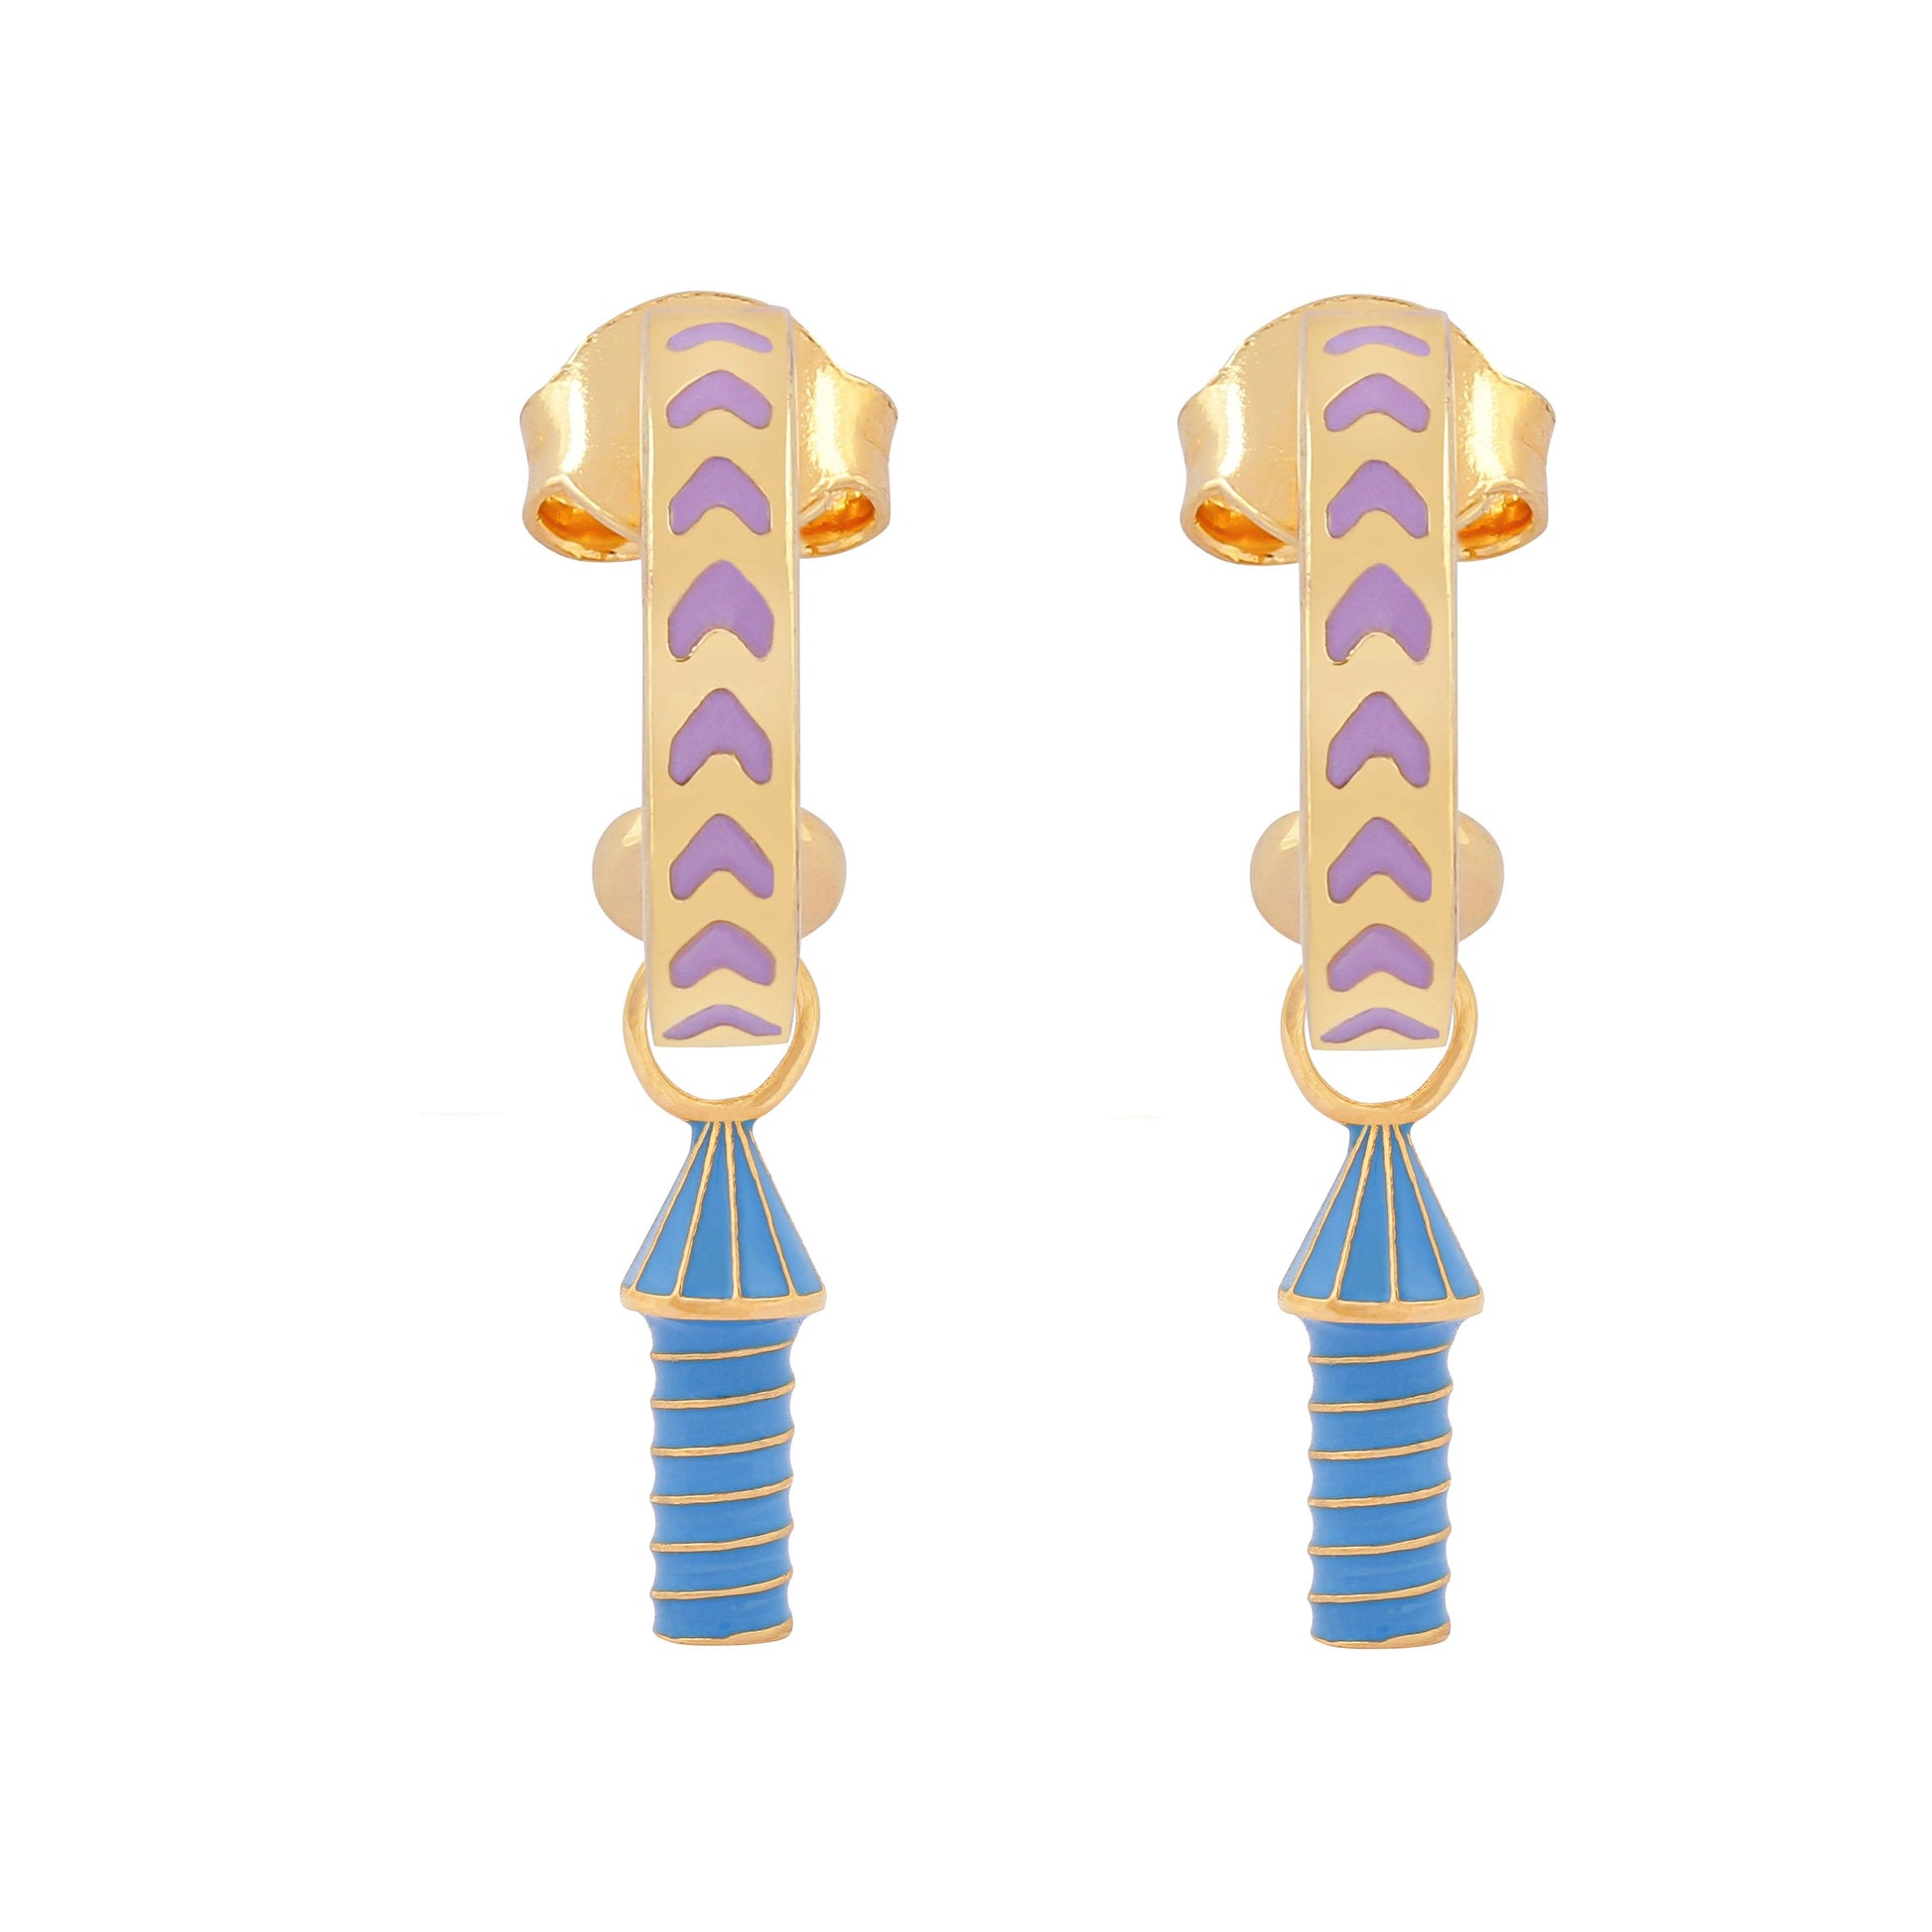 image of rocket enamel earrings in purple, blue and gold on white background